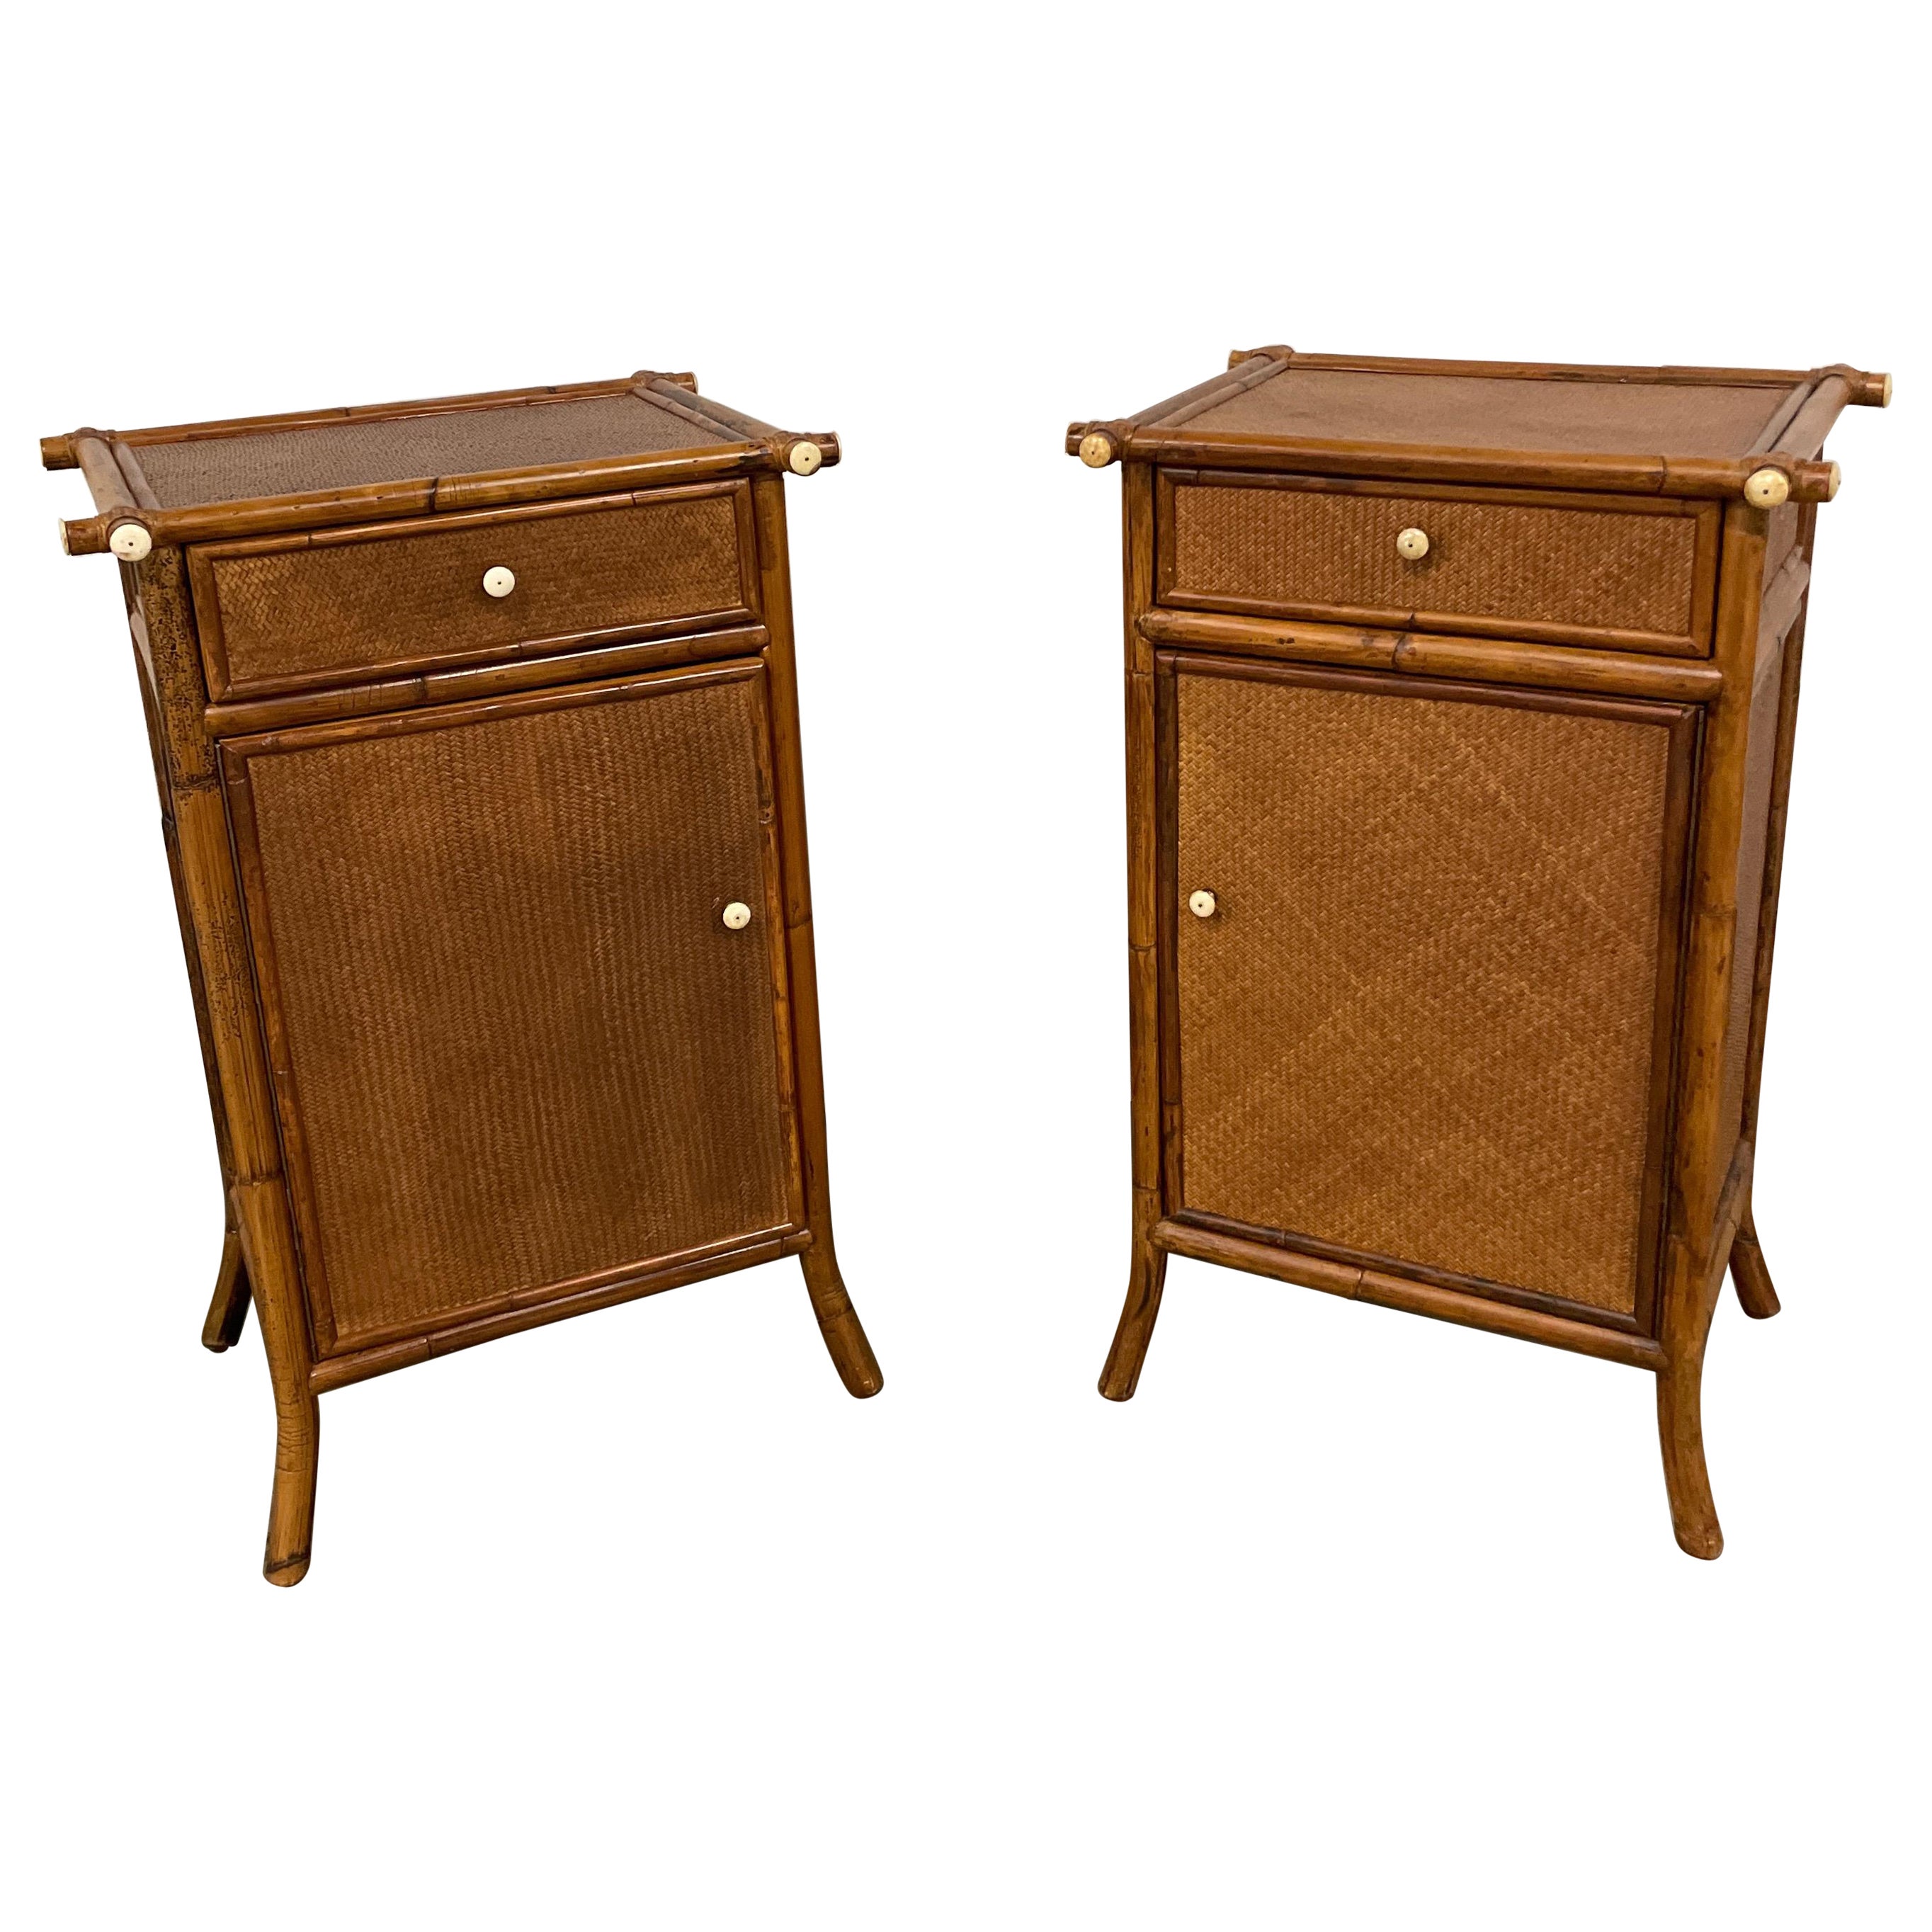 Pair of Burnt Bamboo Cabinets by E. Murio